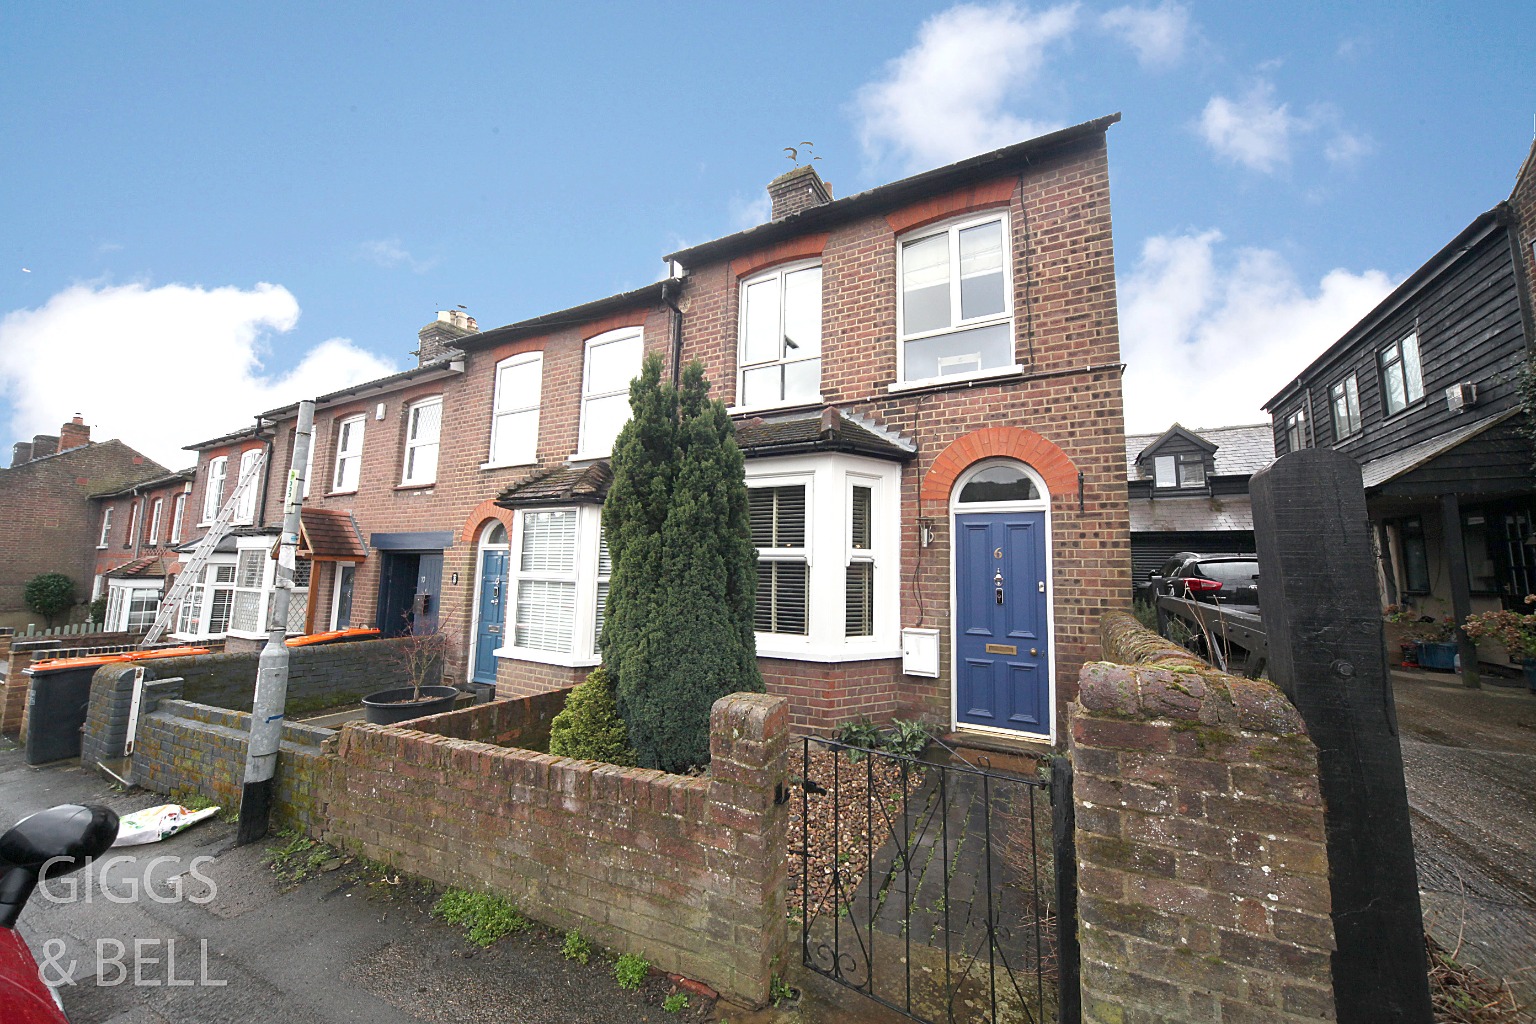 3 bed terraced house for sale in Summer Street, Luton - Property Image 1